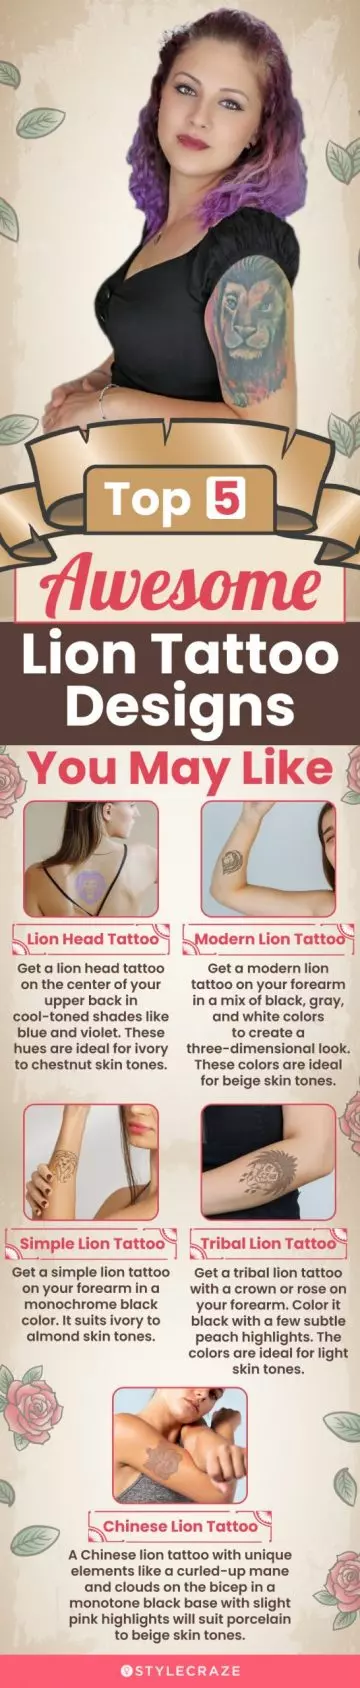 top 5 awesome lion tattoo designs you may like (infographic)